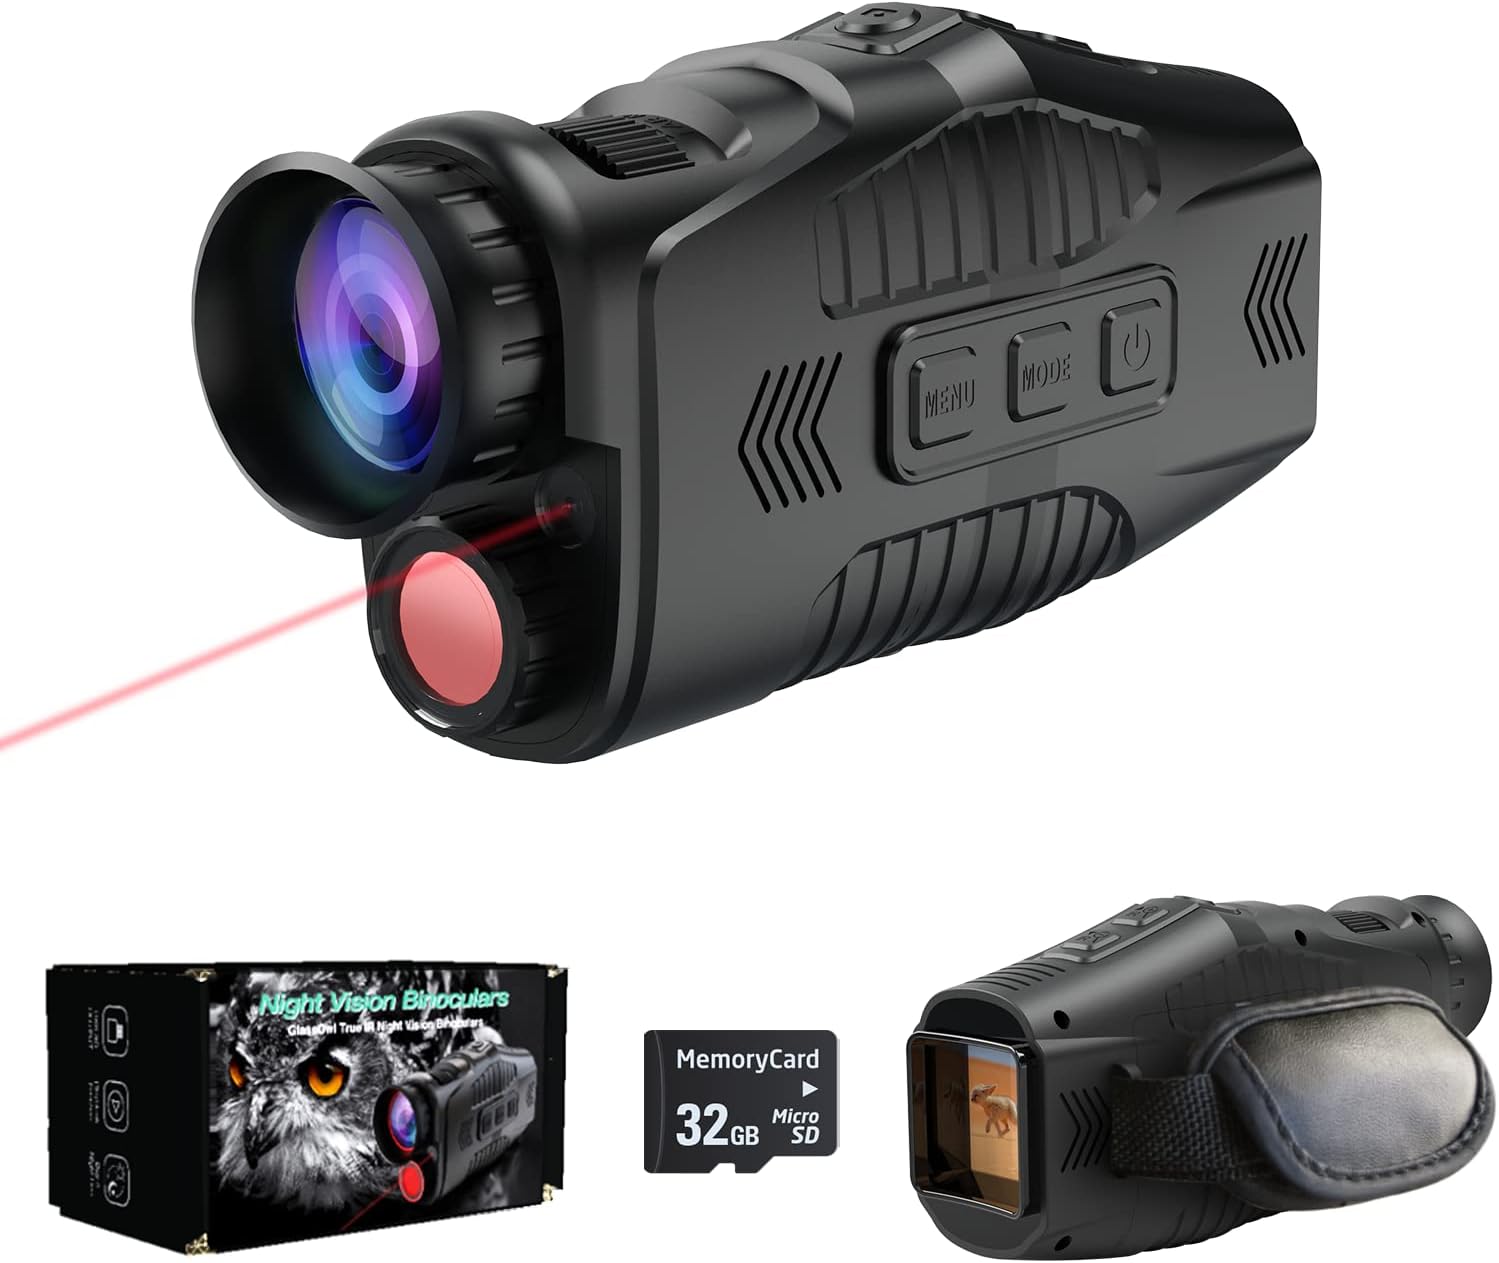 Experience unparalleled clarity in the wild with the best monocular for hunting, featuring night vision and a laser pointer for precise targeting, complete with a 32GB Micro SD card for capturing memorable moments.